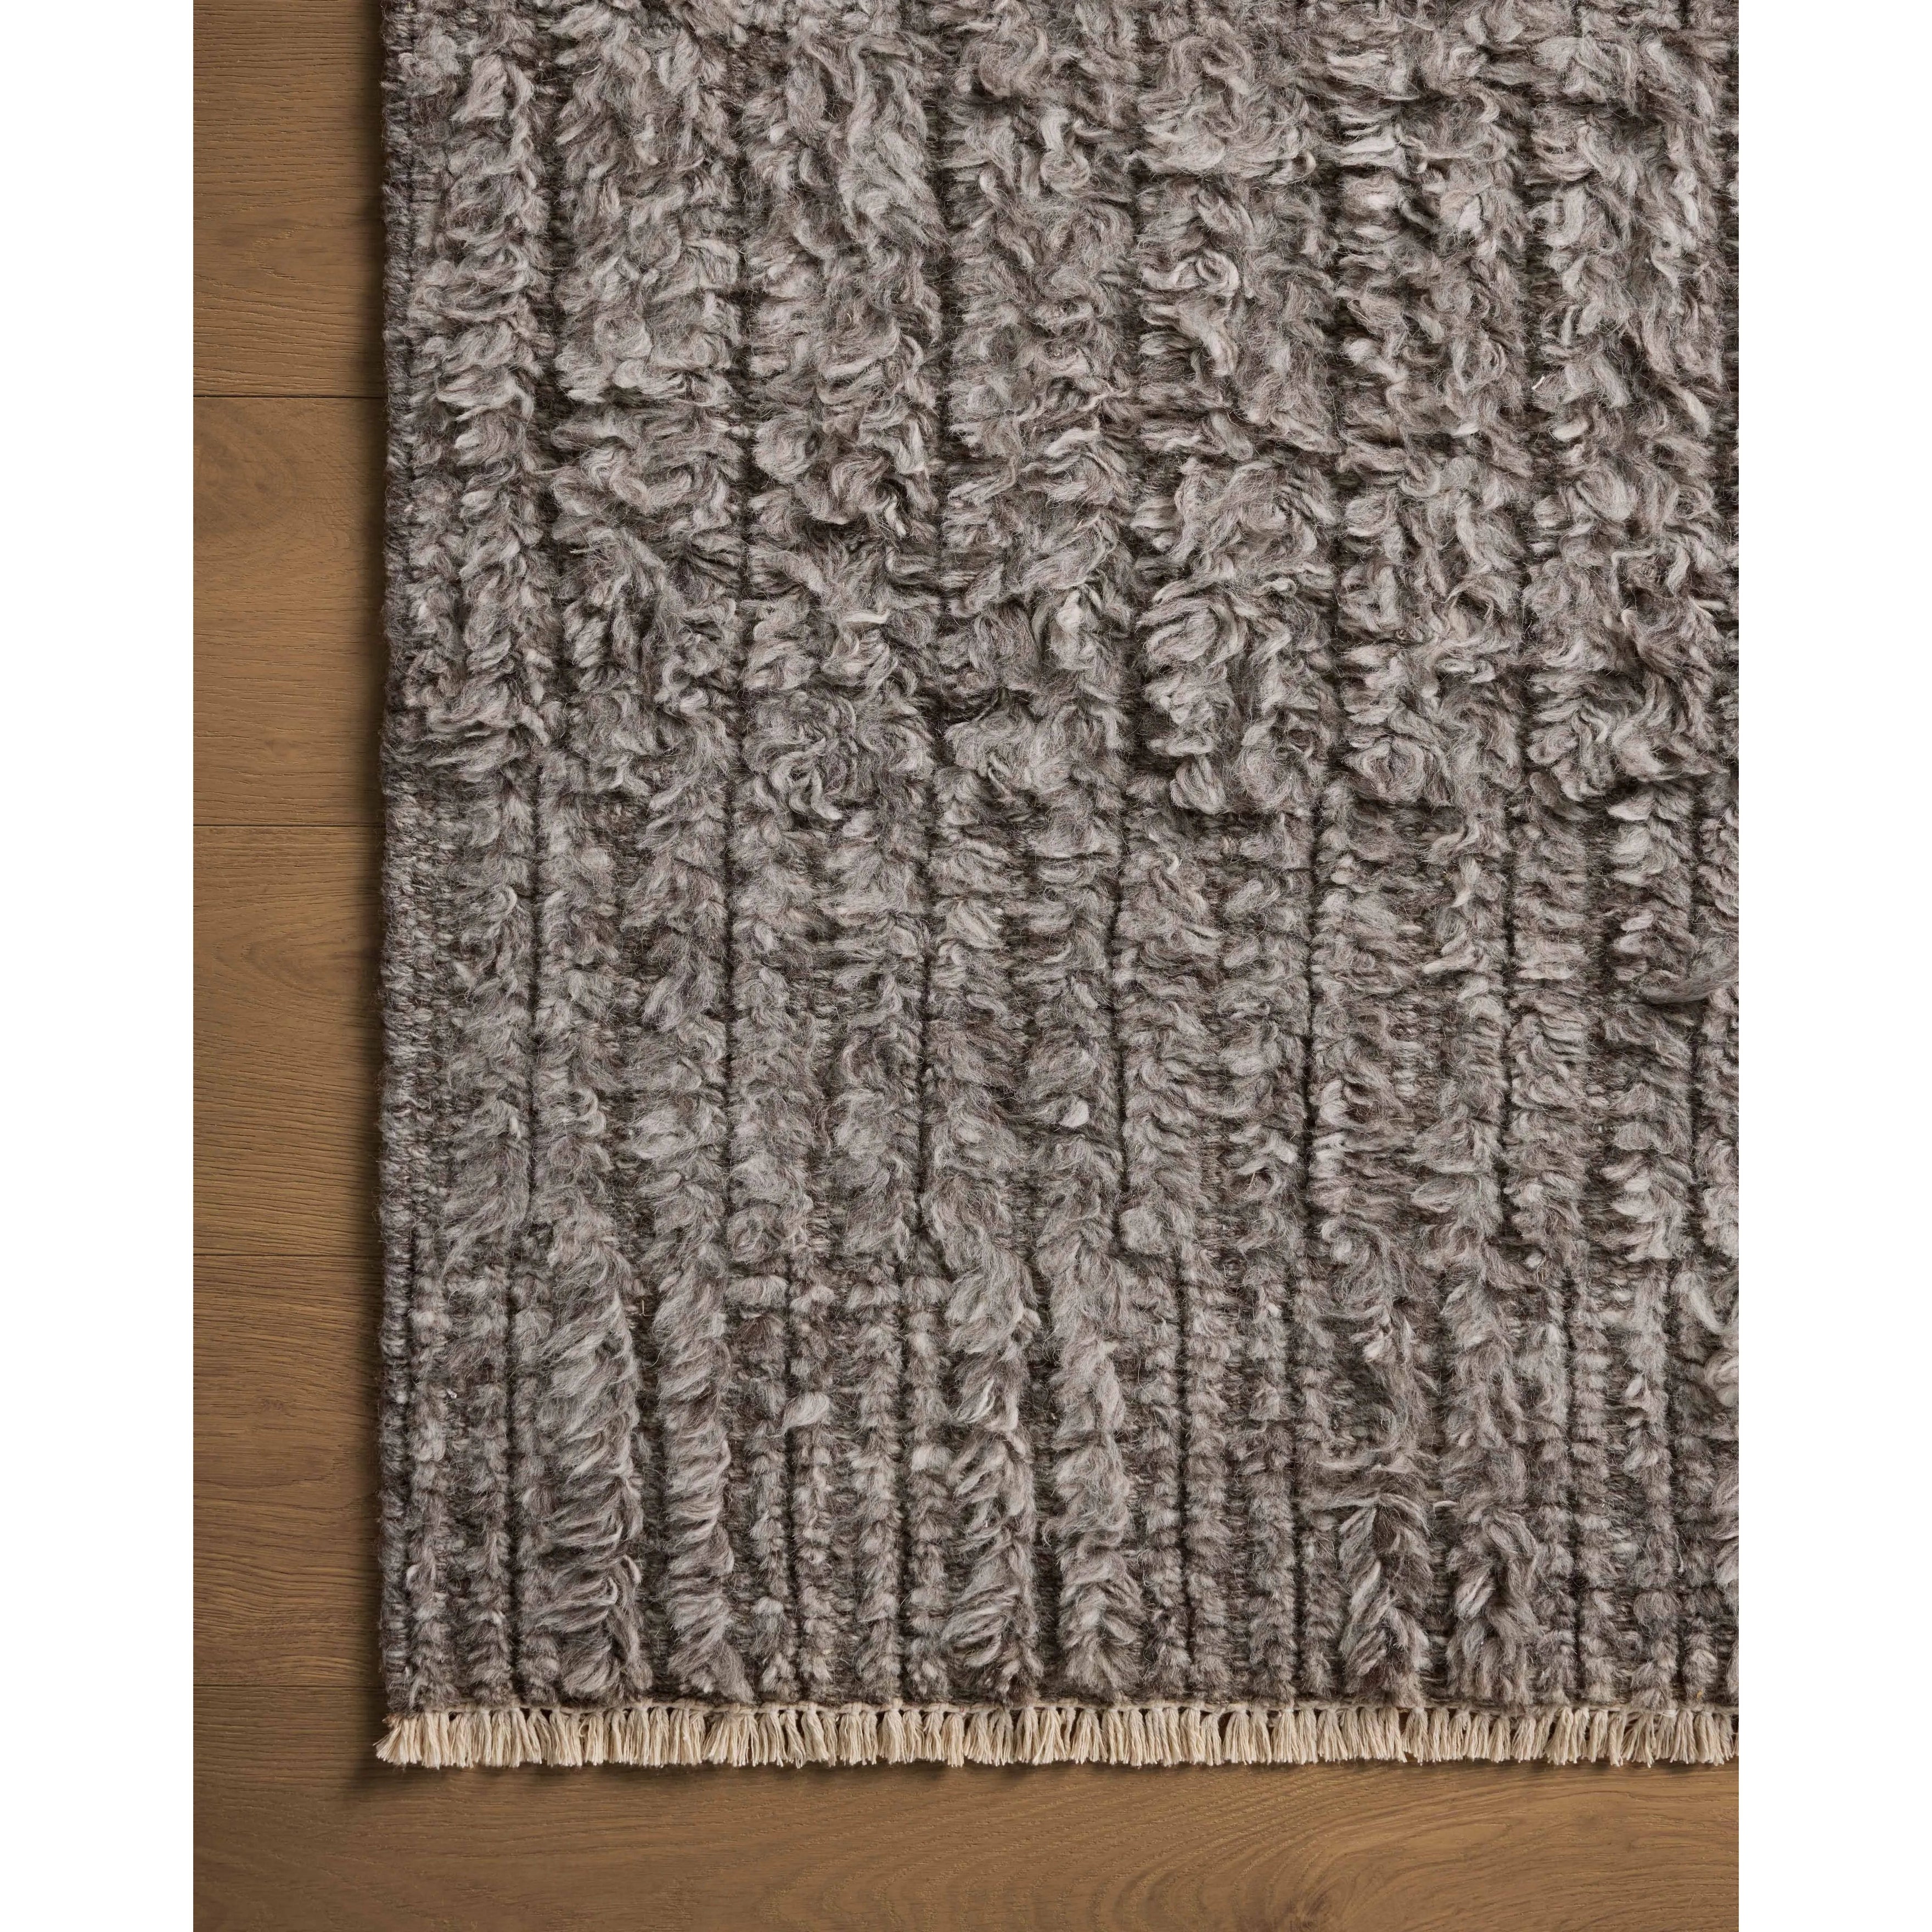 Irresistible to walk upon, the Dana Granite Rug by Brigette Romanek x Loloi has a high-low texture that alternates between a subtly shaggy pile and a soft base. Horizontal broken stripes give the area rug a fresh and energized structure, while a finish of fringe along the edges accentuates its sense of movement. Amethyst Home provides interior design, new home construction design consulting, vintage area rugs, and lighting in the Winter Garden metro area.